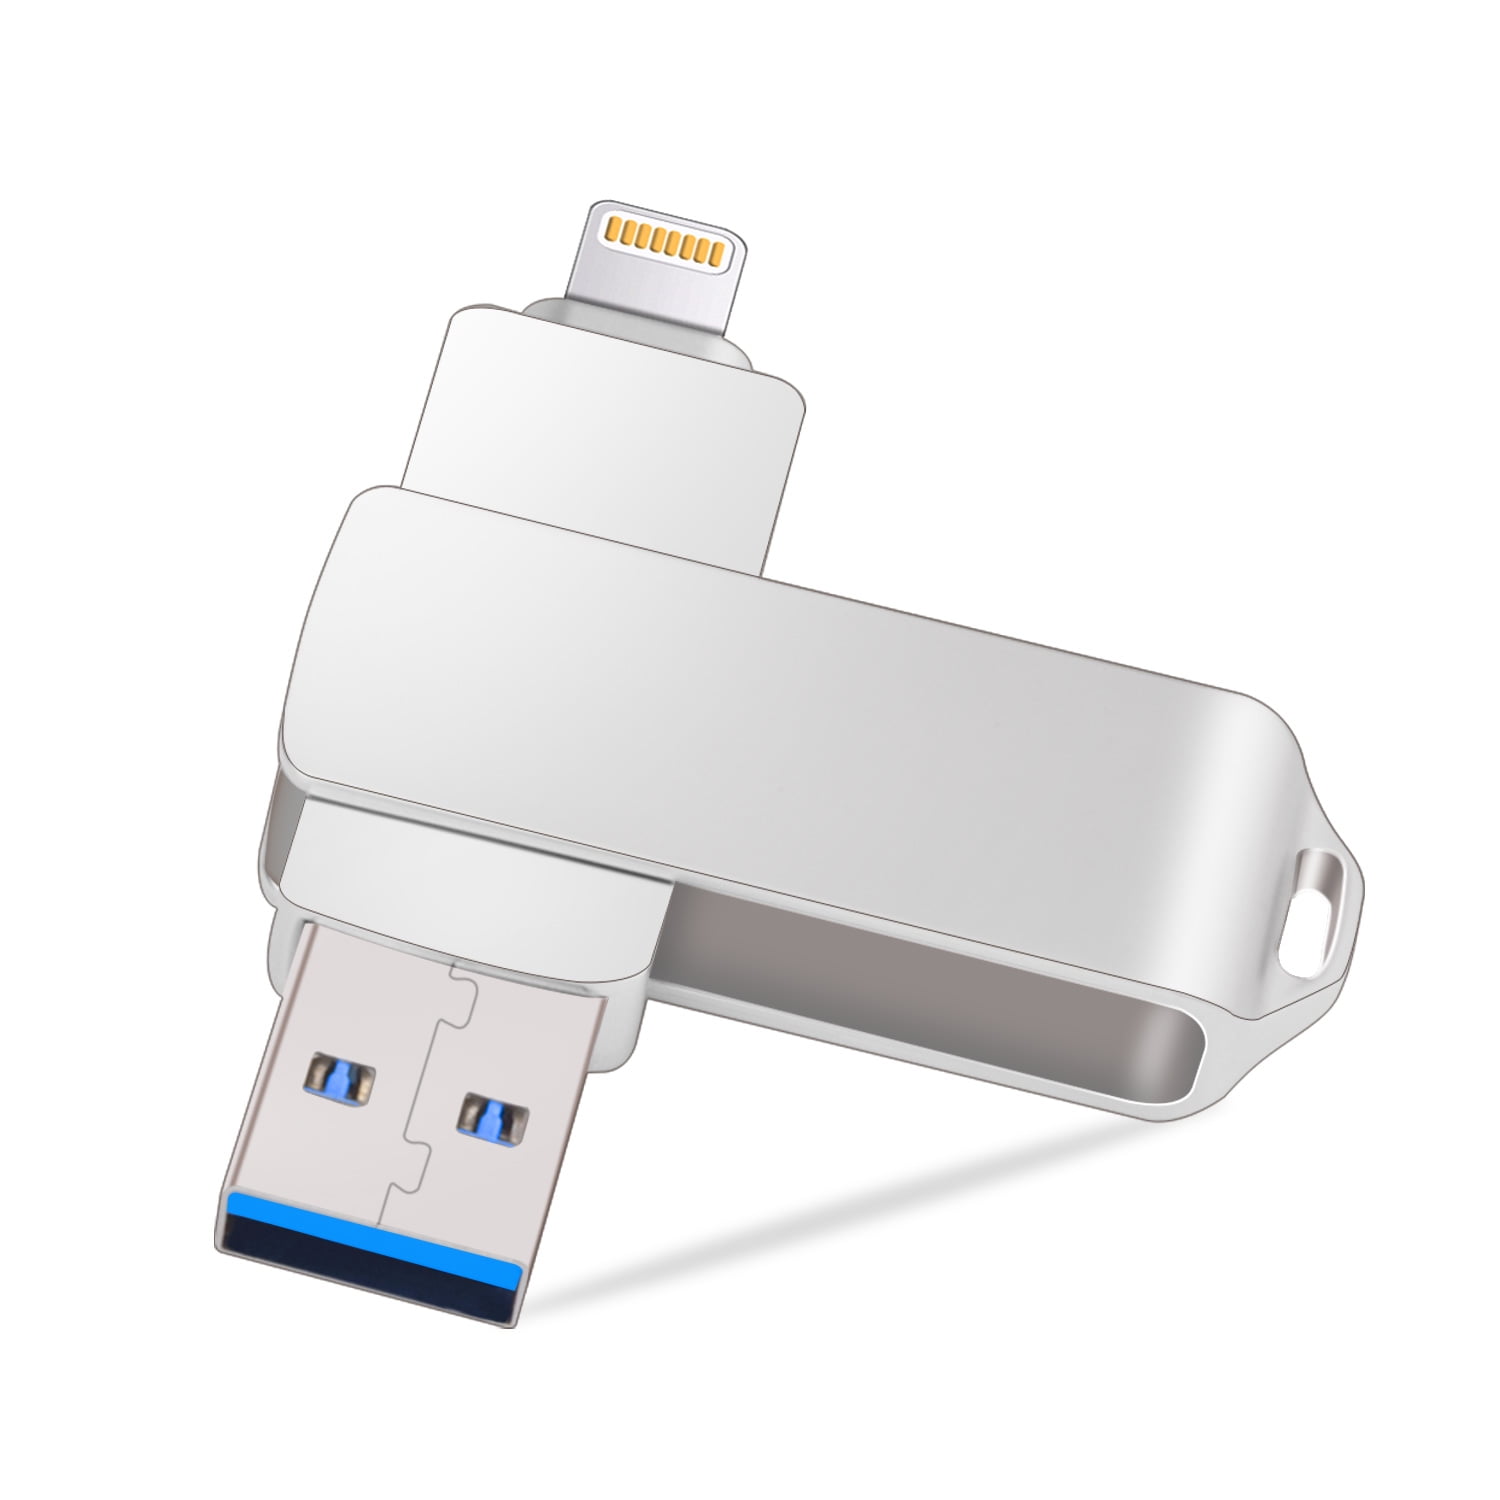 SanDisk iXpand 128GB Flash Drive for iPhone iPad and Computers 